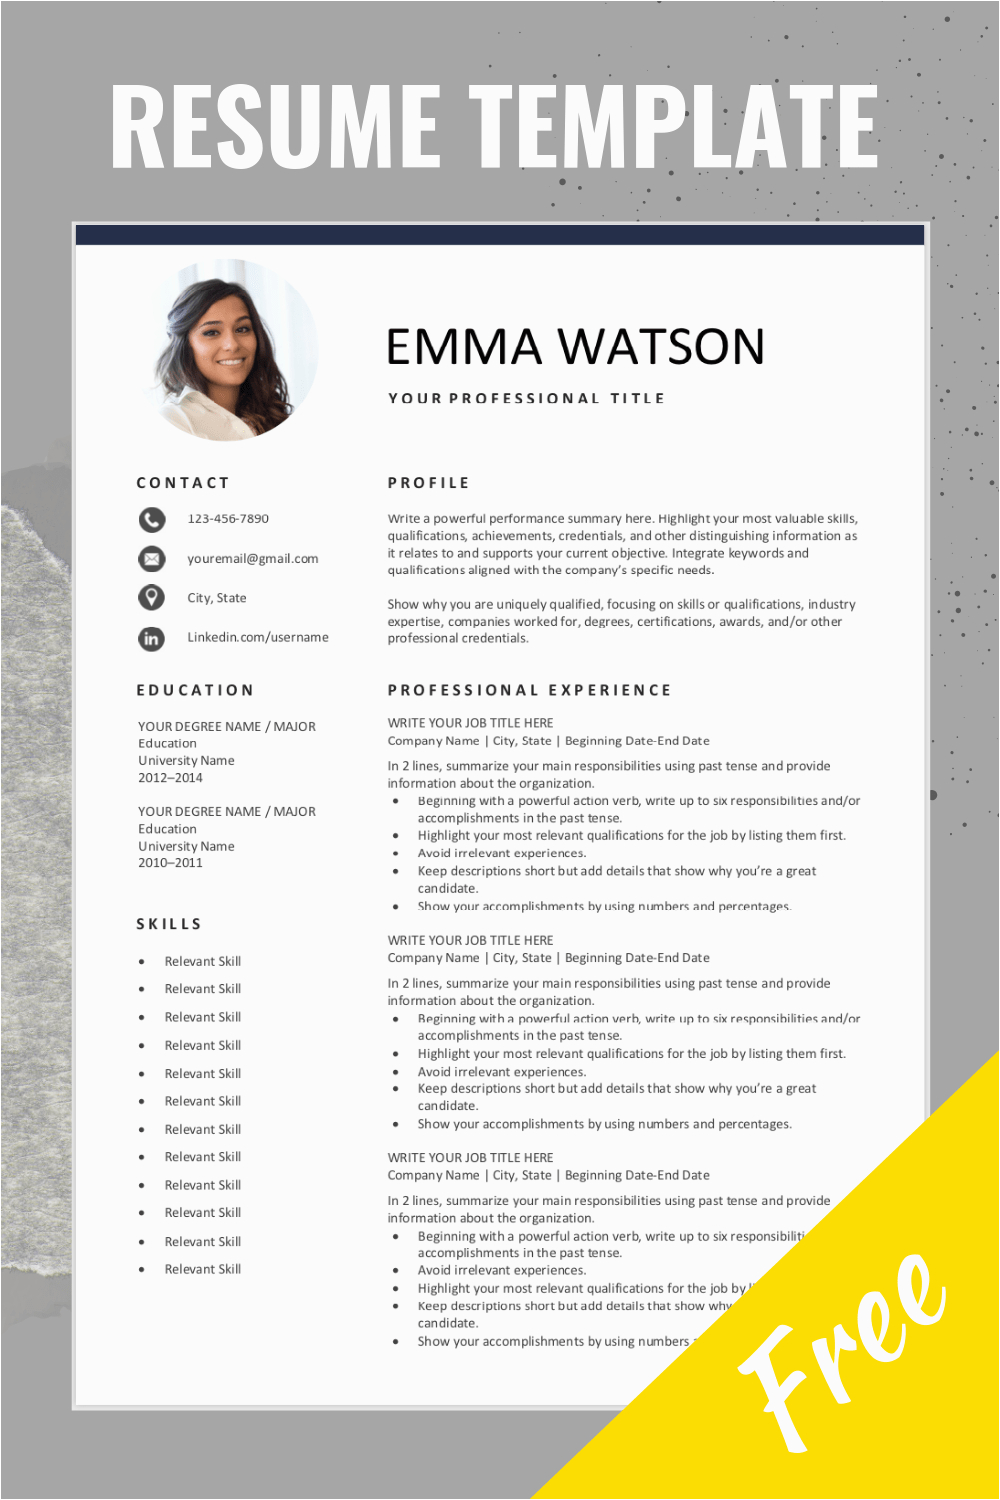 Resume Template Free Download with Photo Resume Template Free Editable Layout are You Looking